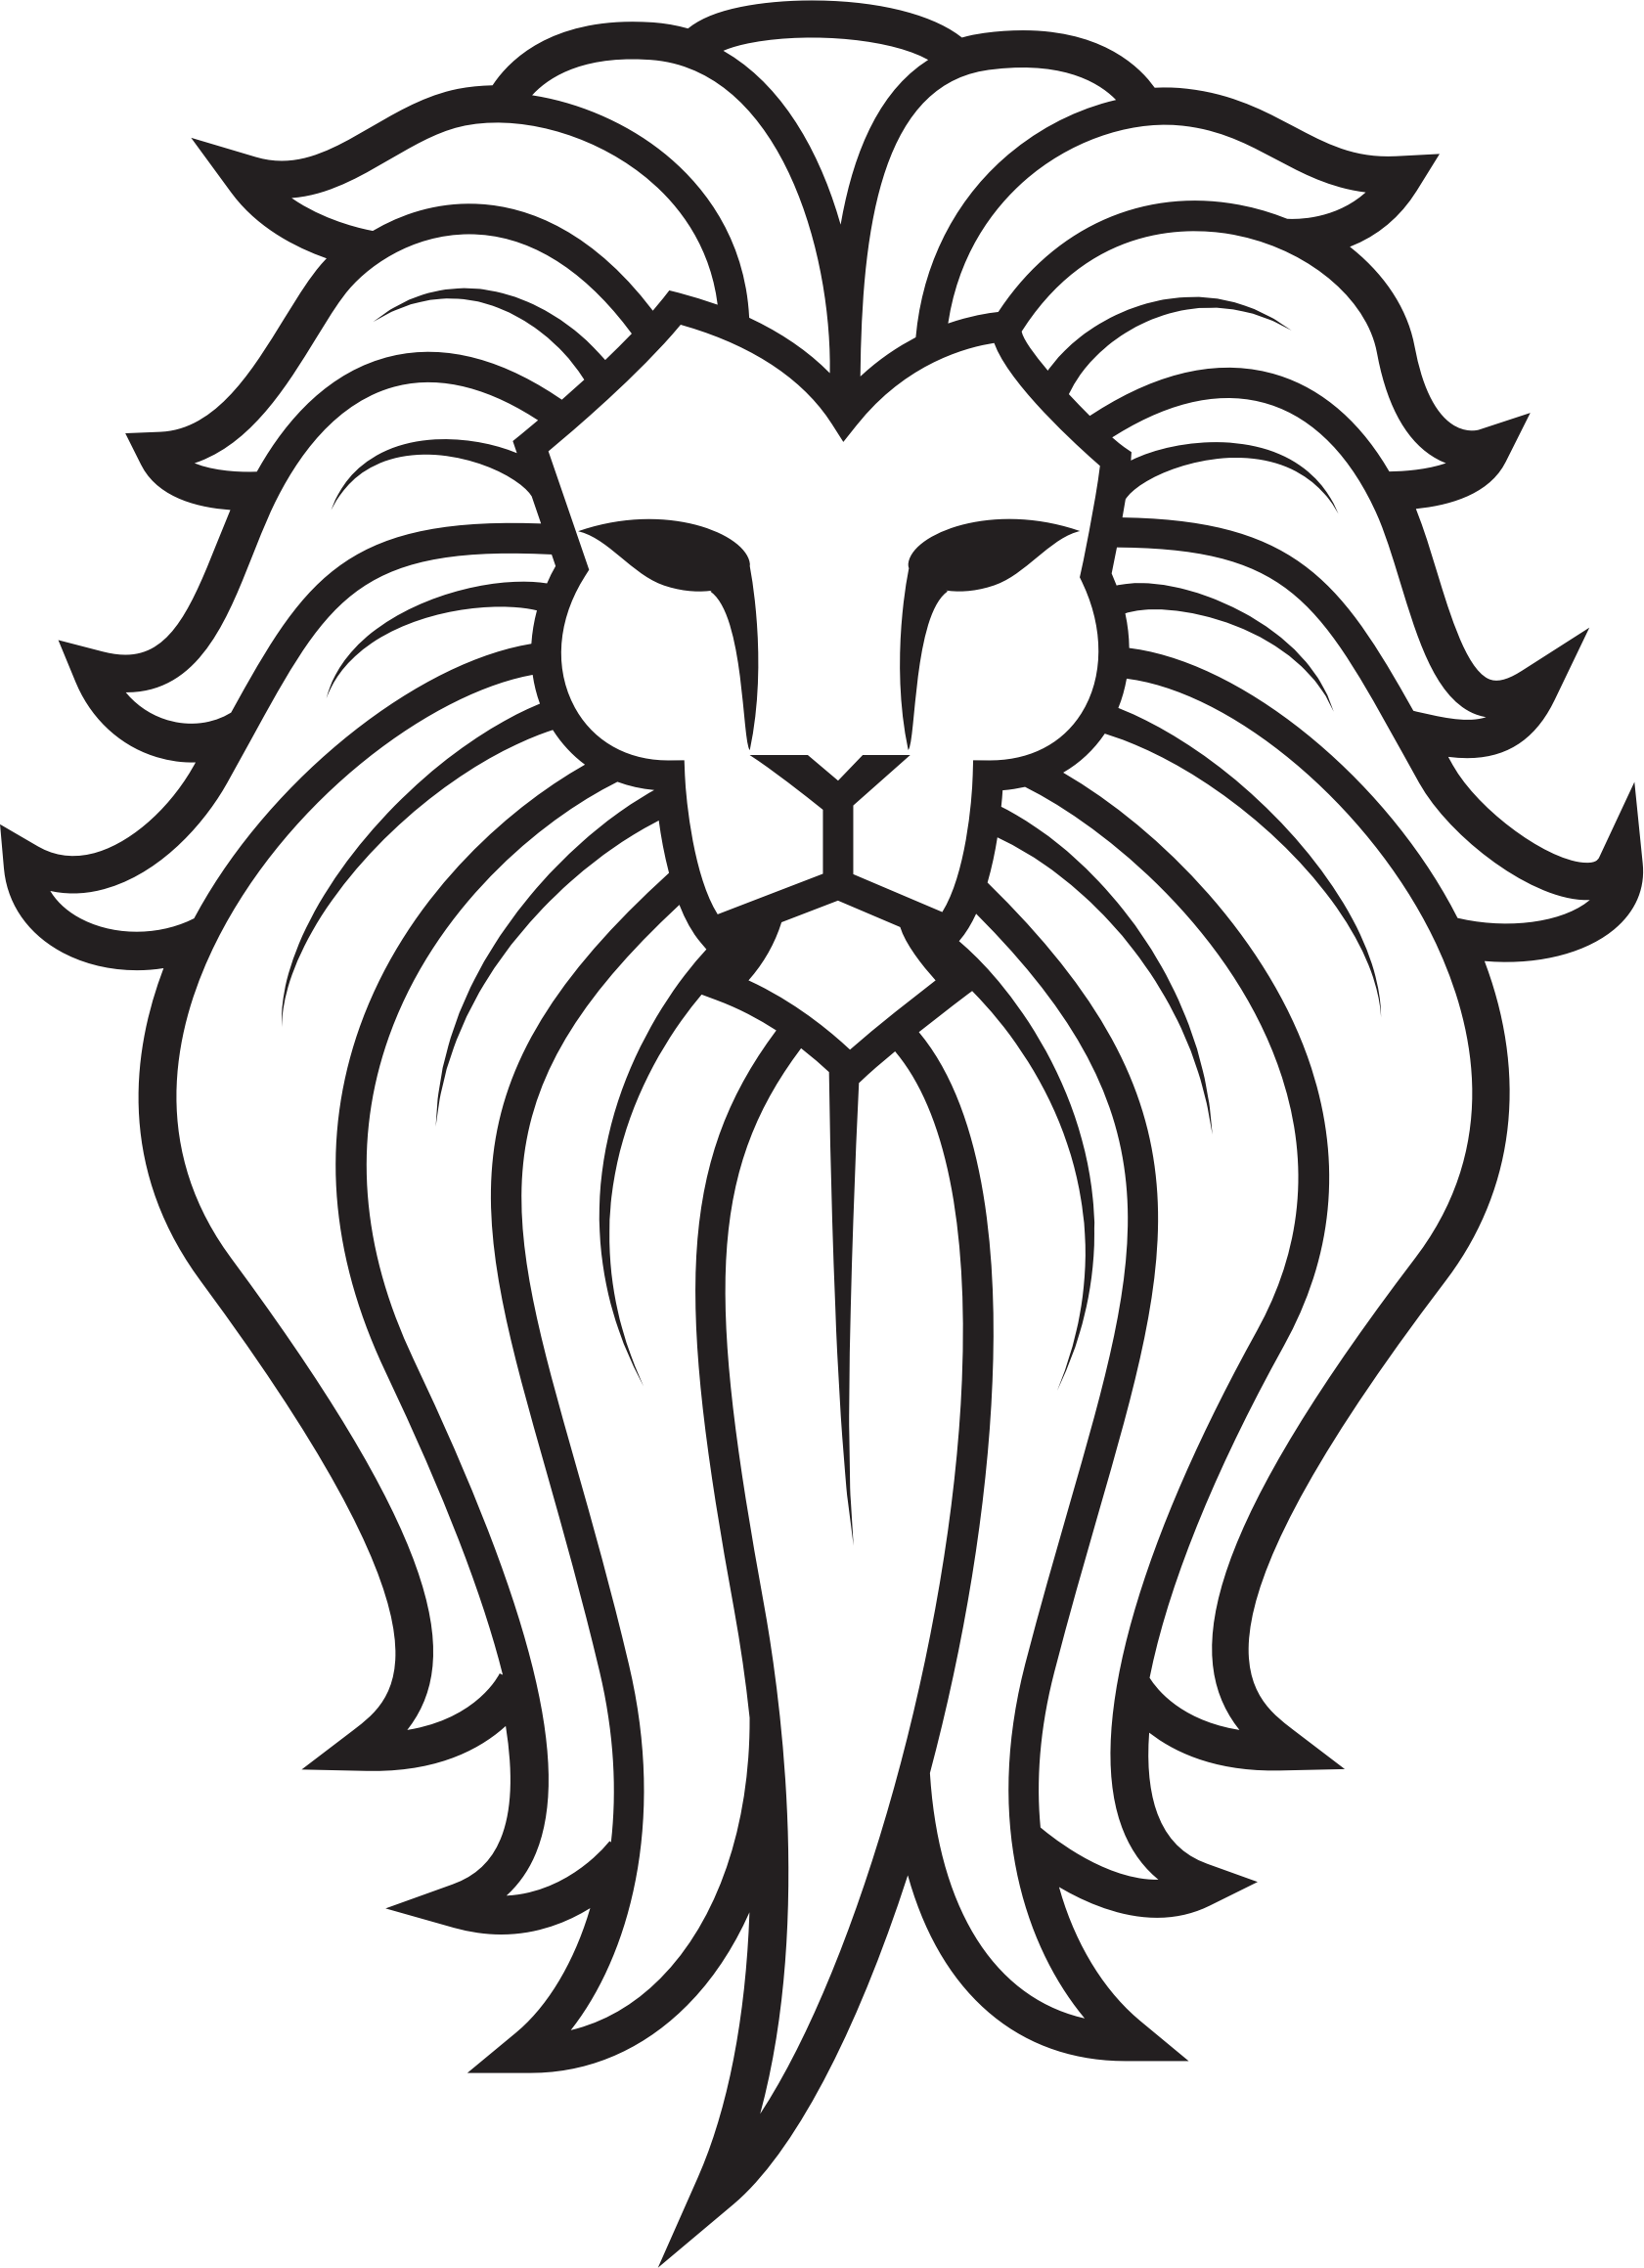 Tattoo Lion  Lion Tattoo Black And White Transparent PNG  3000x3000   Free Download on NicePNG